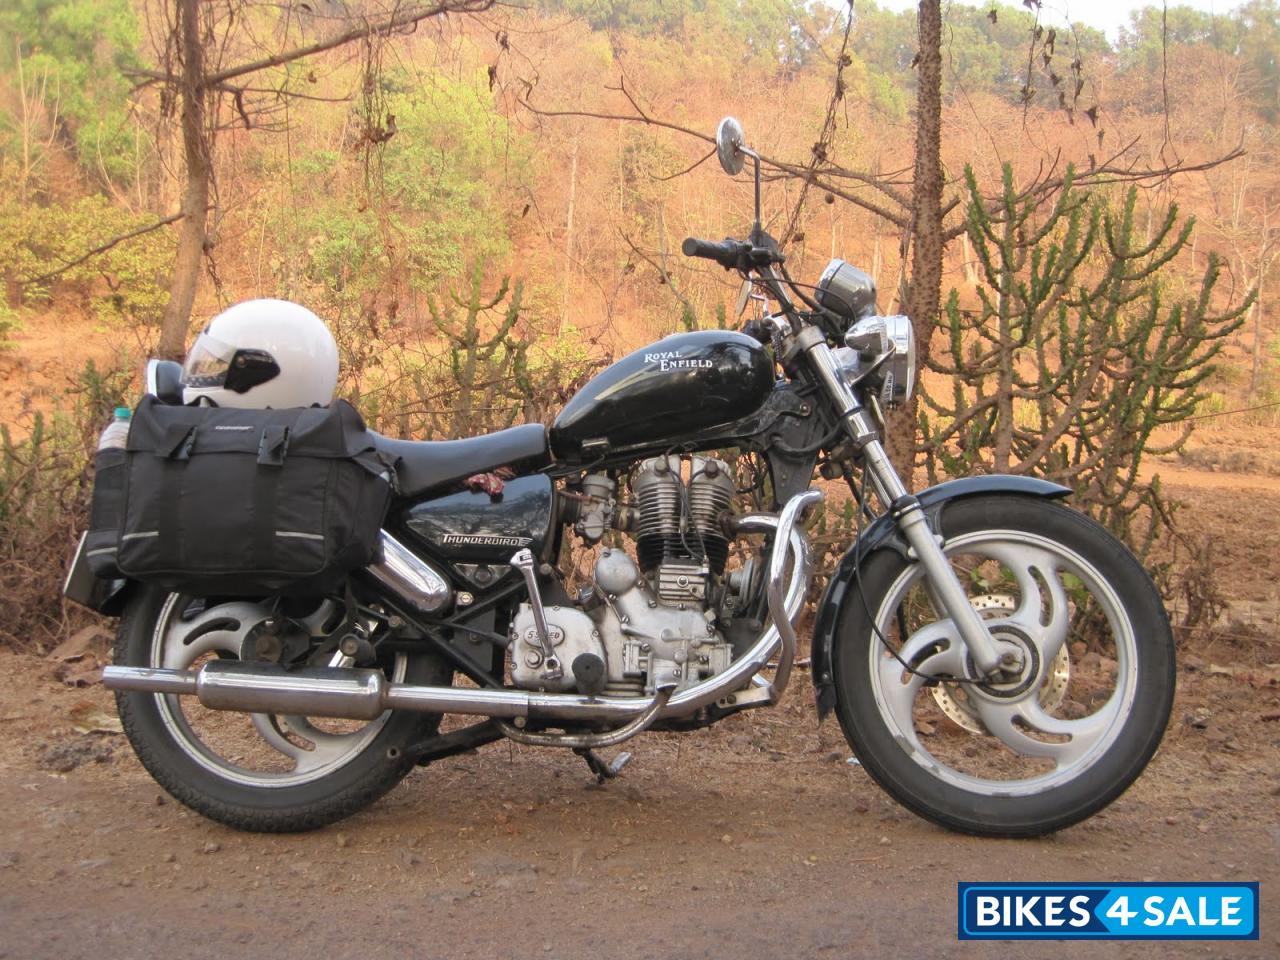 Used 2004 model Royal Enfield Thunderbird for sale in Pune. ID 